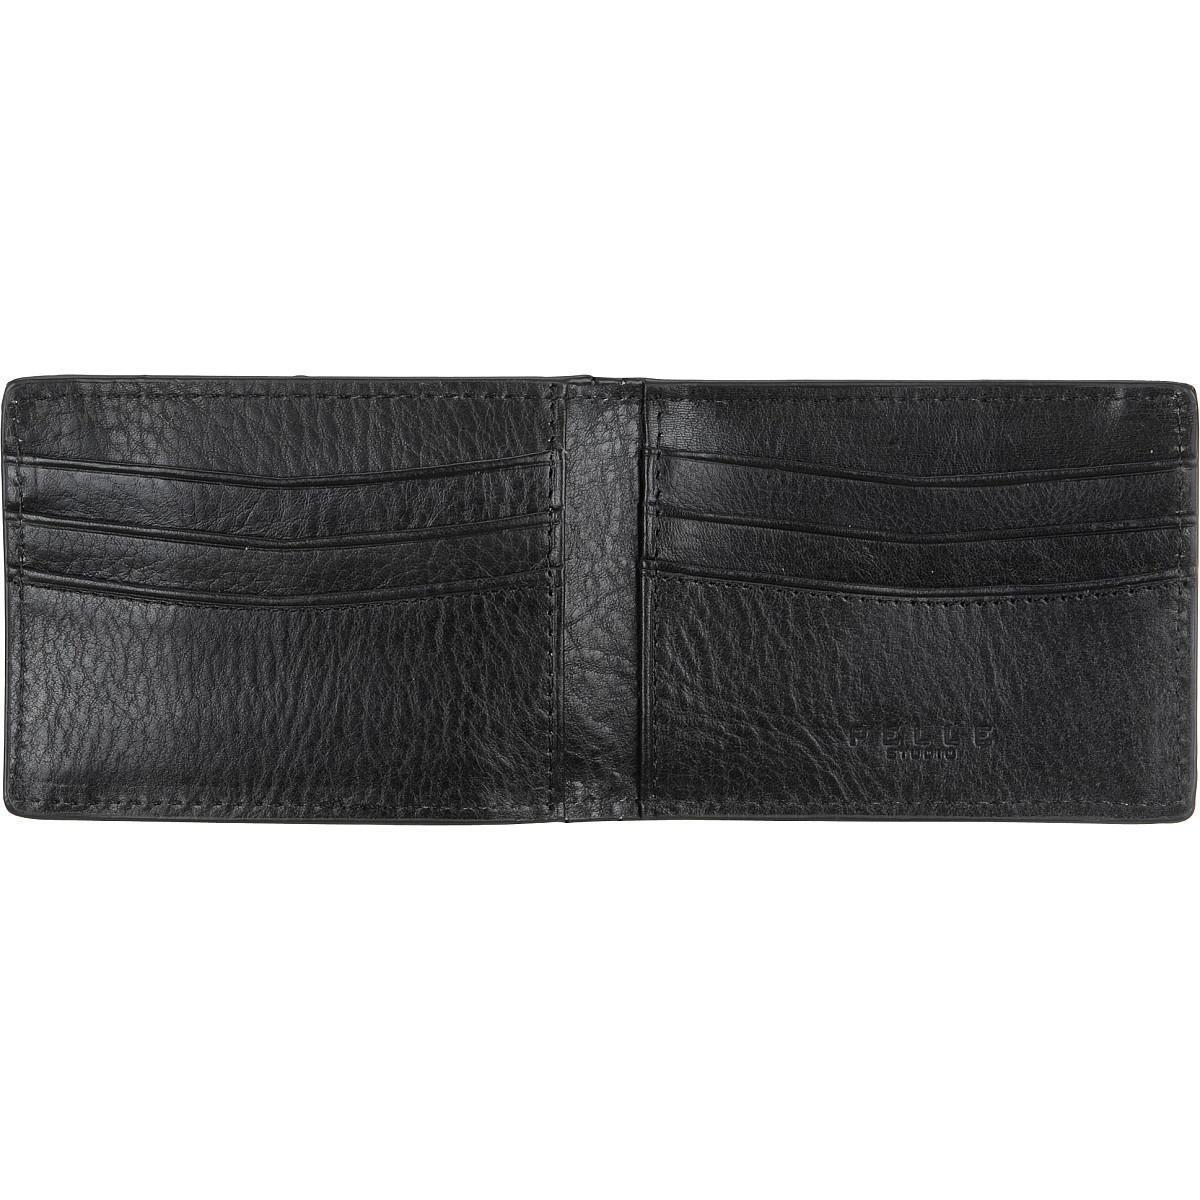 Wilsons Leather Front Pocket Leather Wallet With Bottle Opener in Black for Men - Lyst